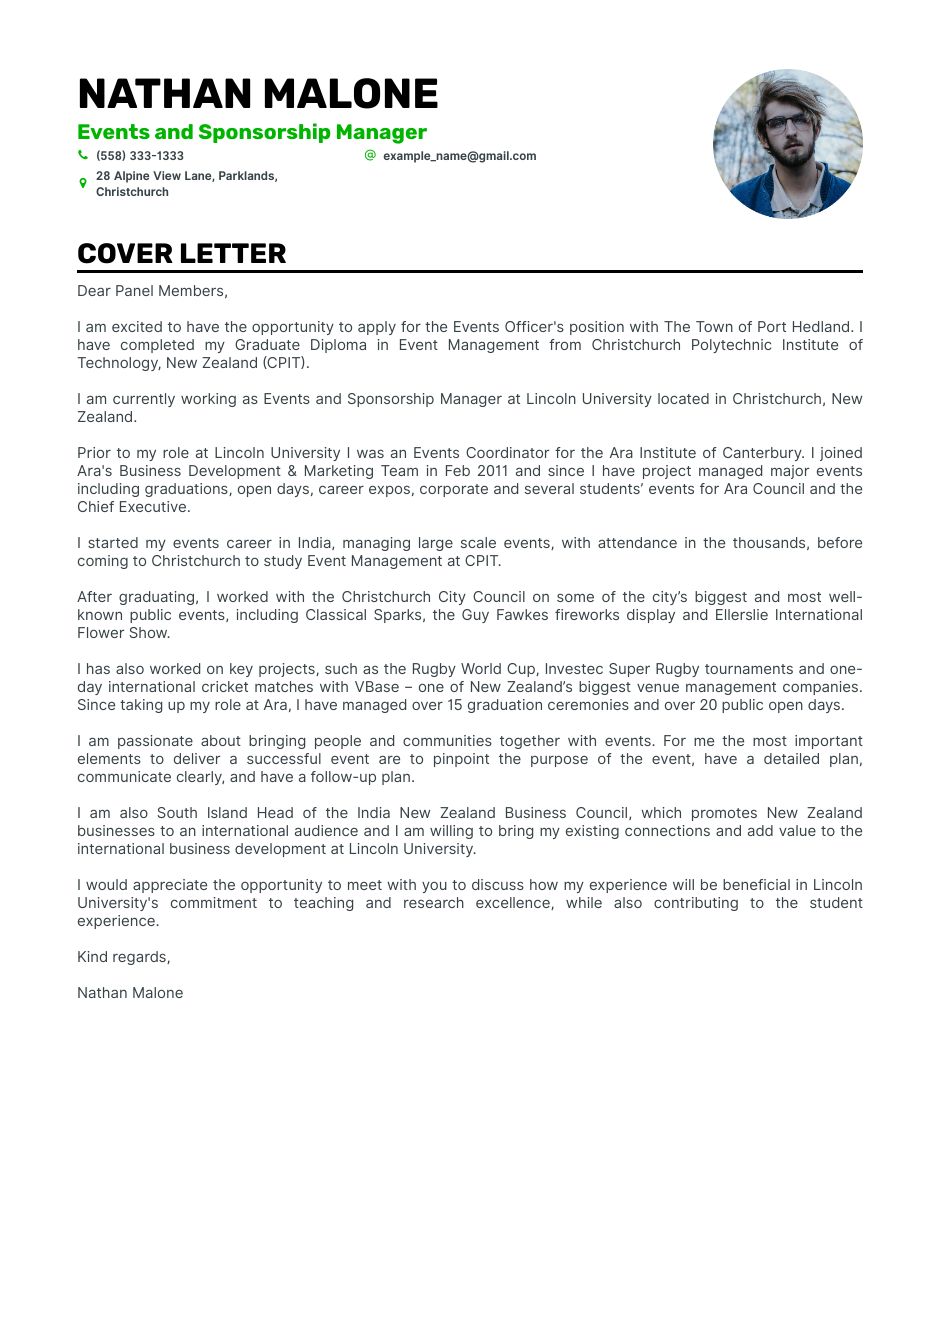 event-director-coverletter.png